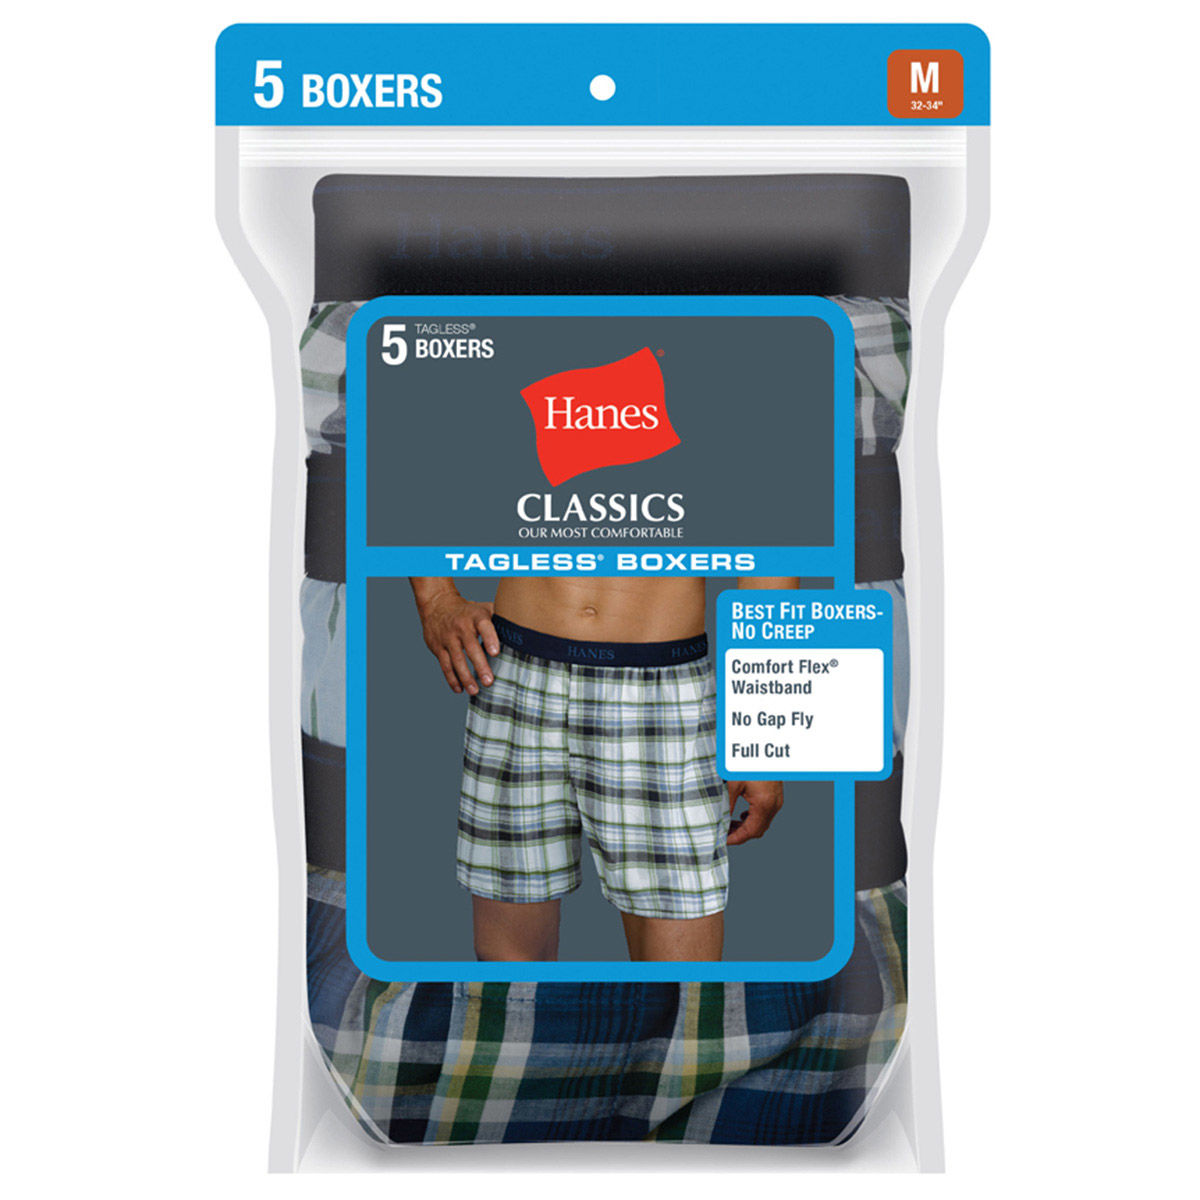 Hanes Men's Classics Tagless Boxers, 5-Pack, Various Patterns